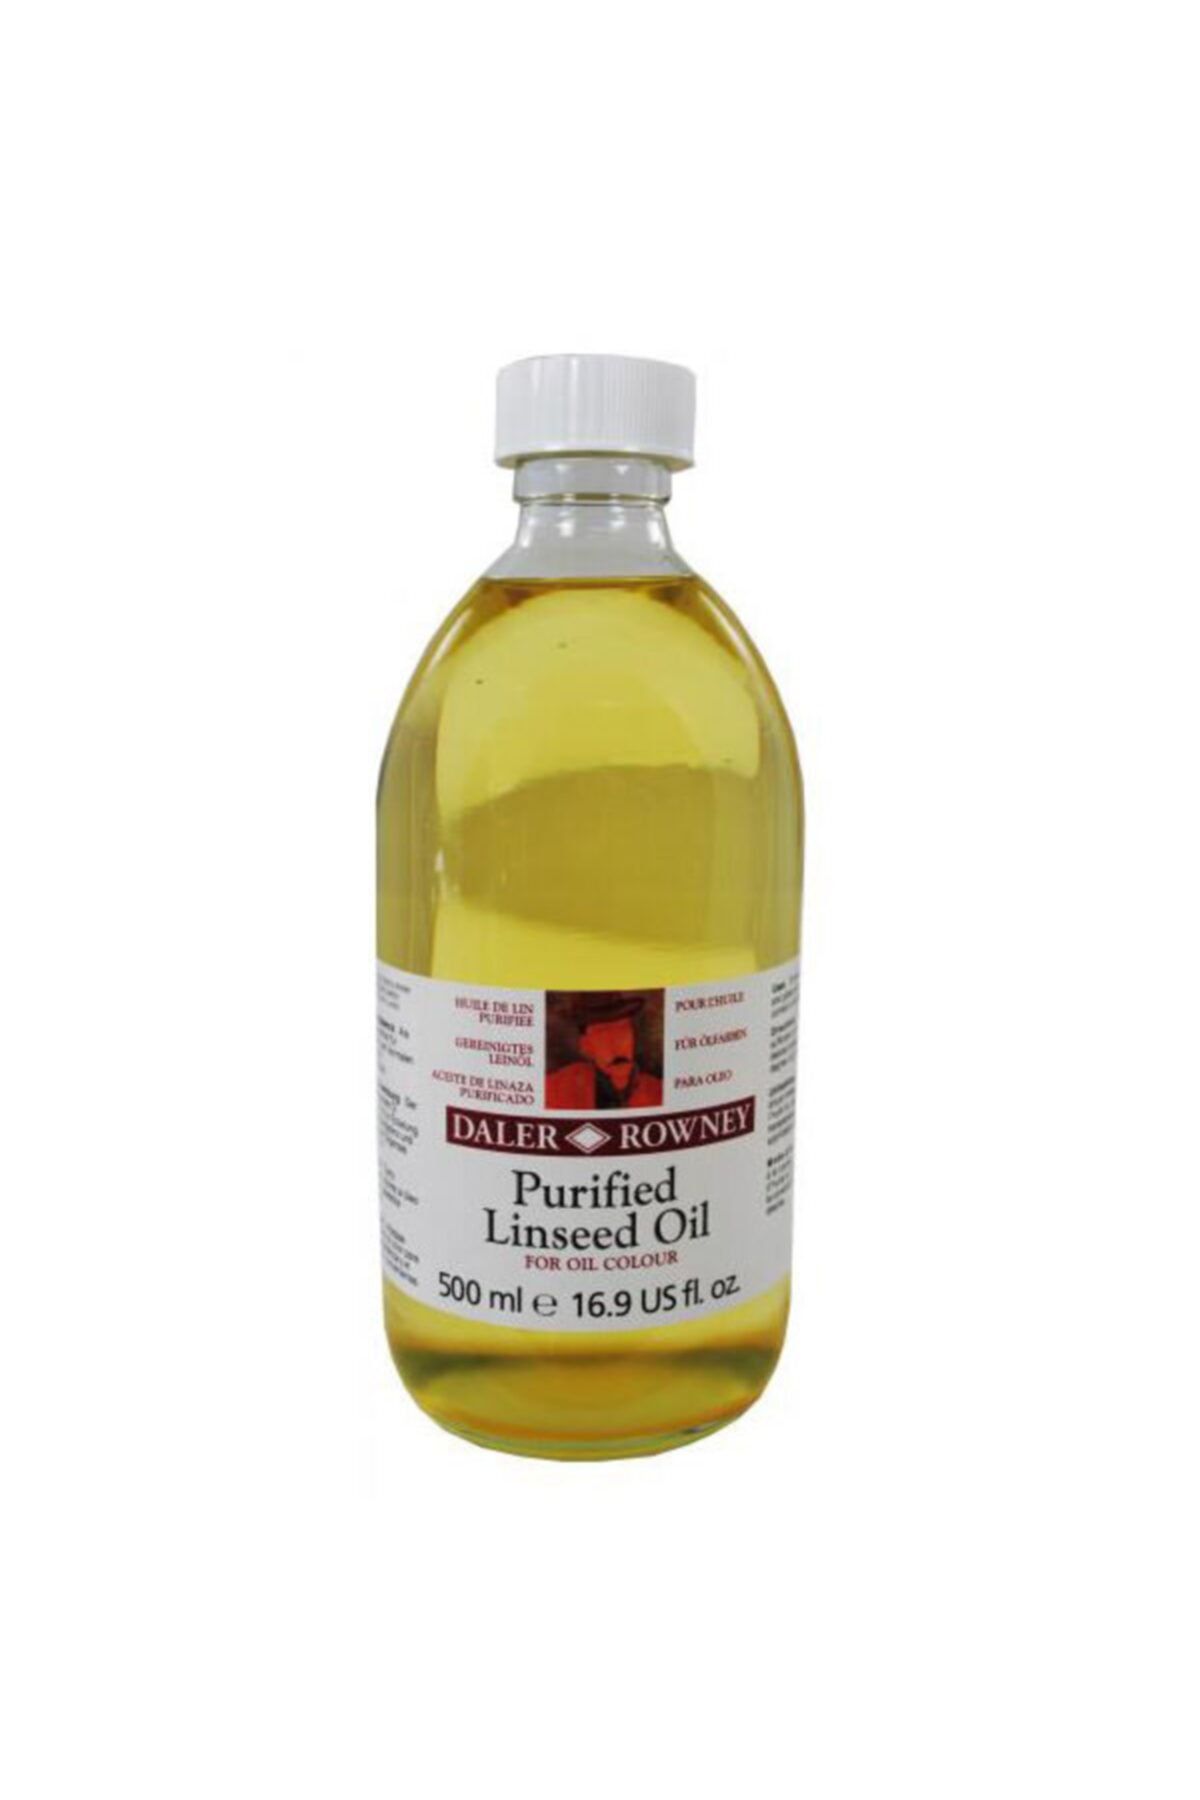 Daler Rowney Purified Linseed Oil 500ml.